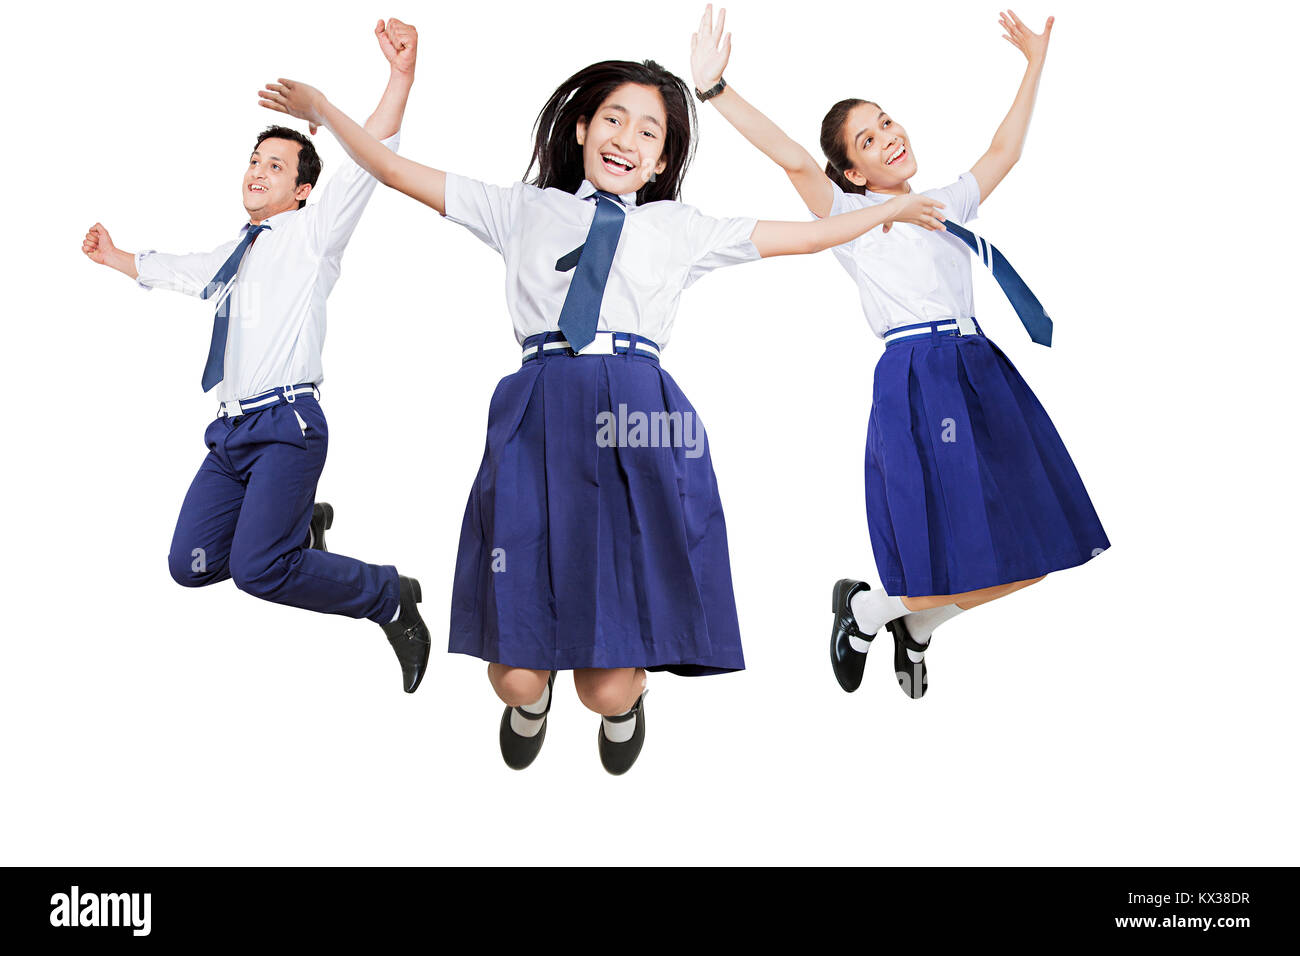 3 Indian Young School Students Friends Jumping Fun Cheerful Excitement Stock Photo